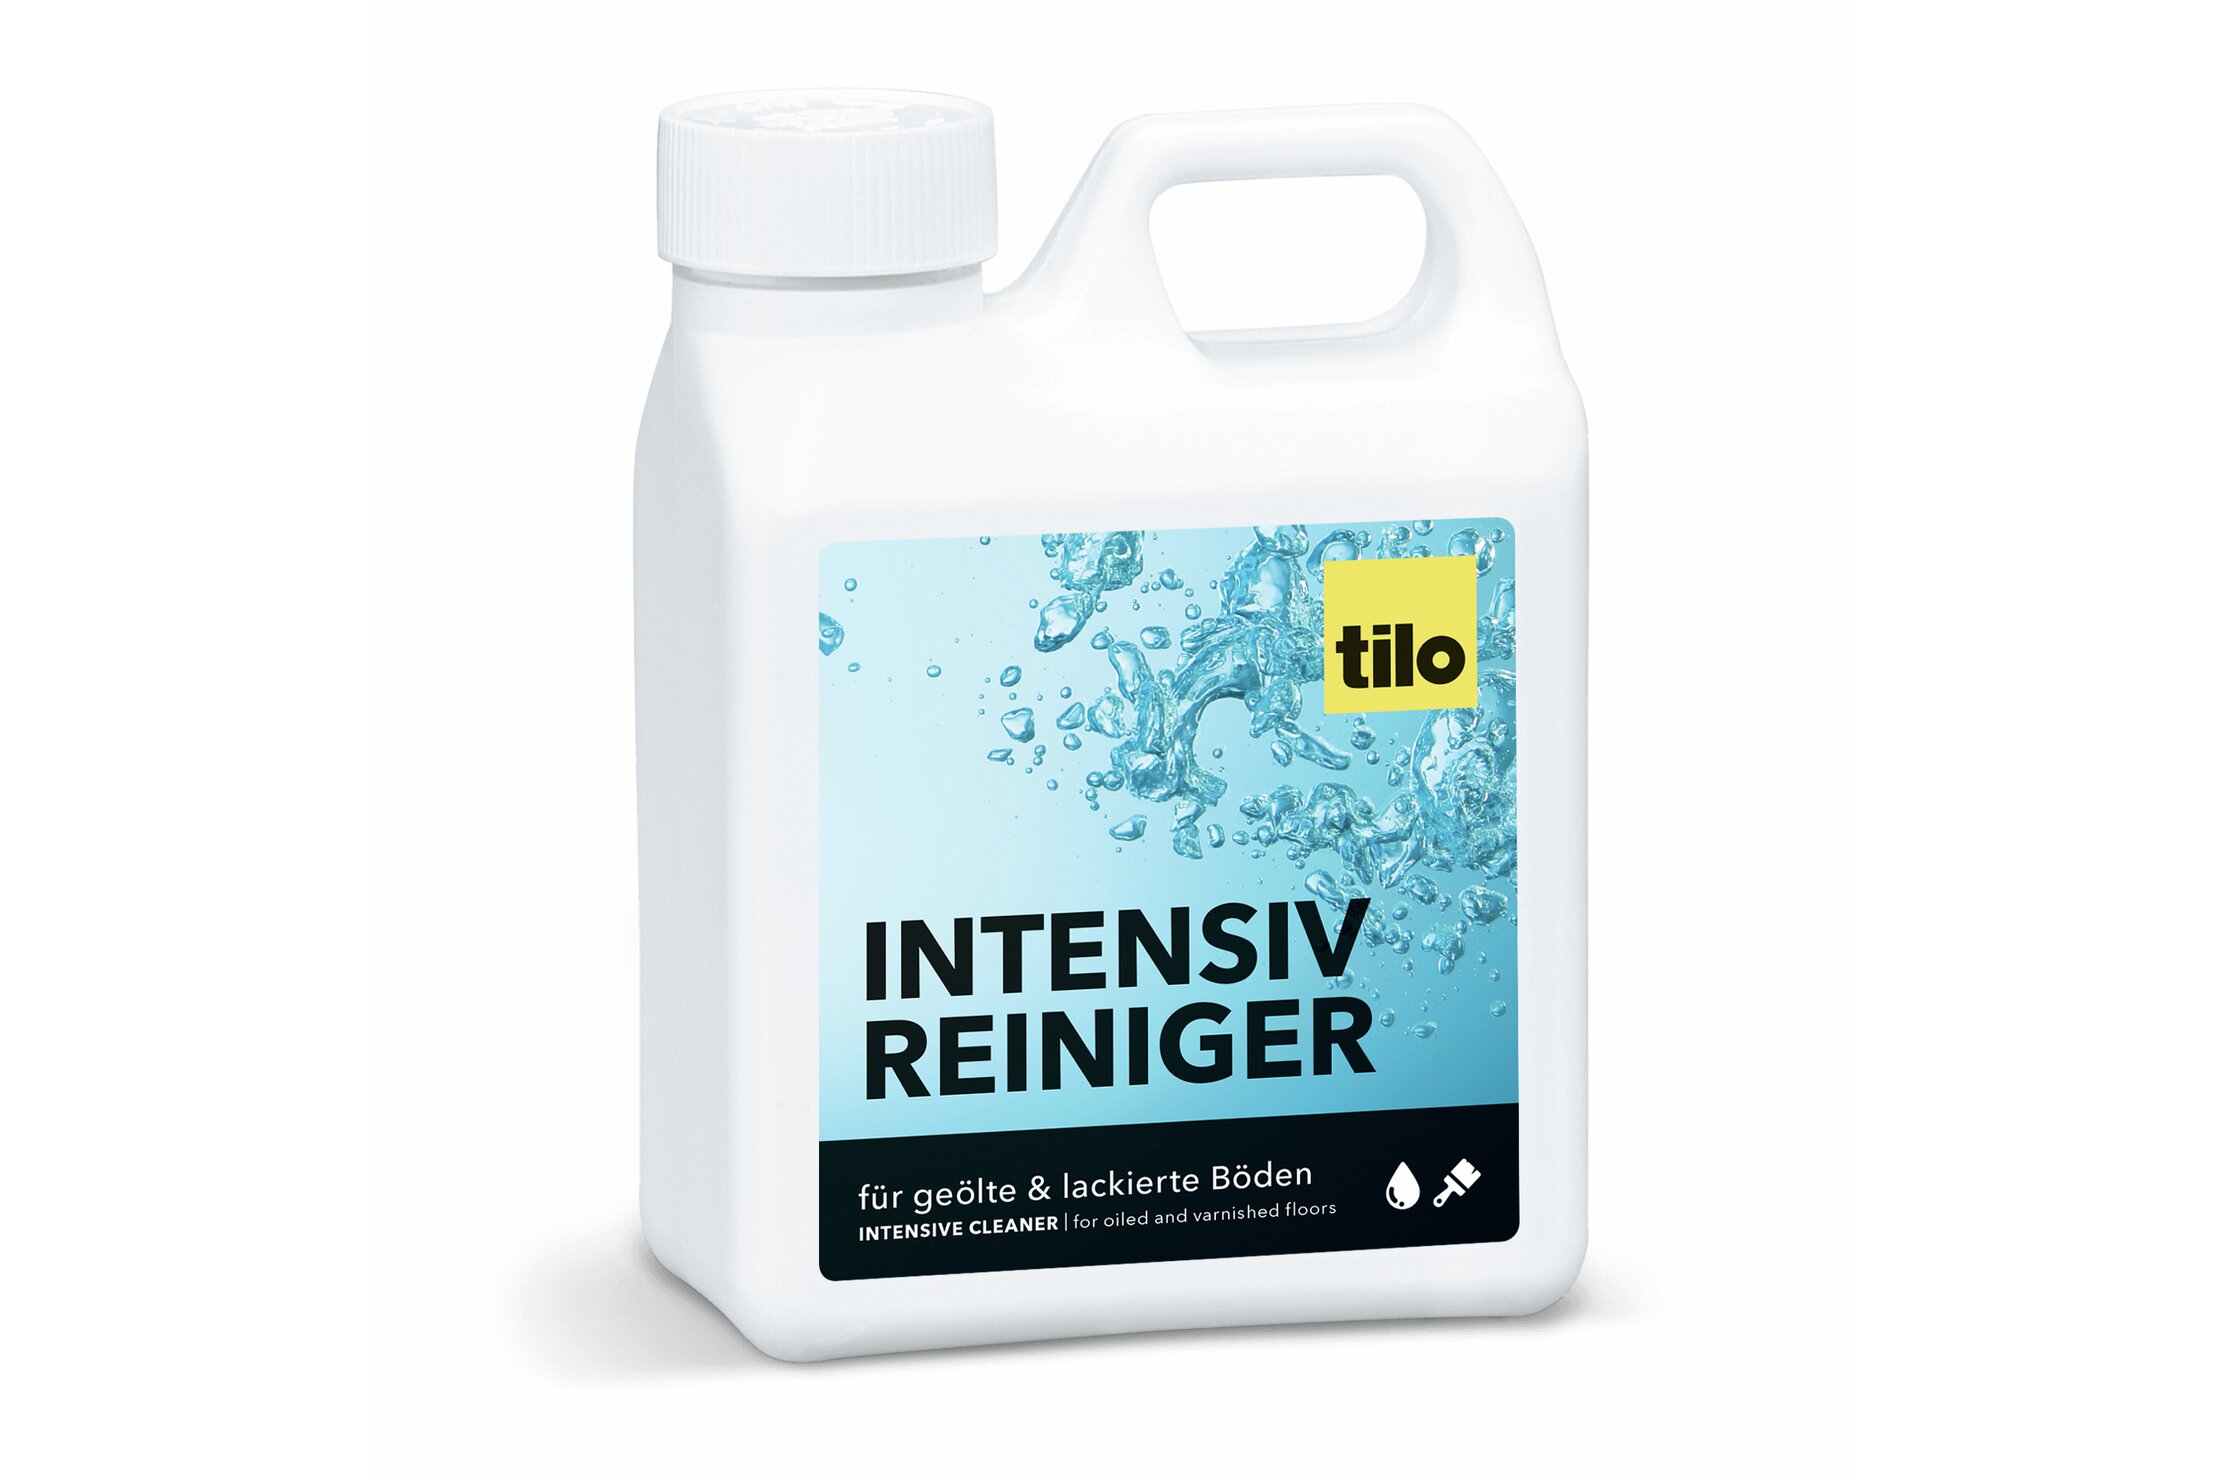 Intensive Cleaner for oiled and varnished floors